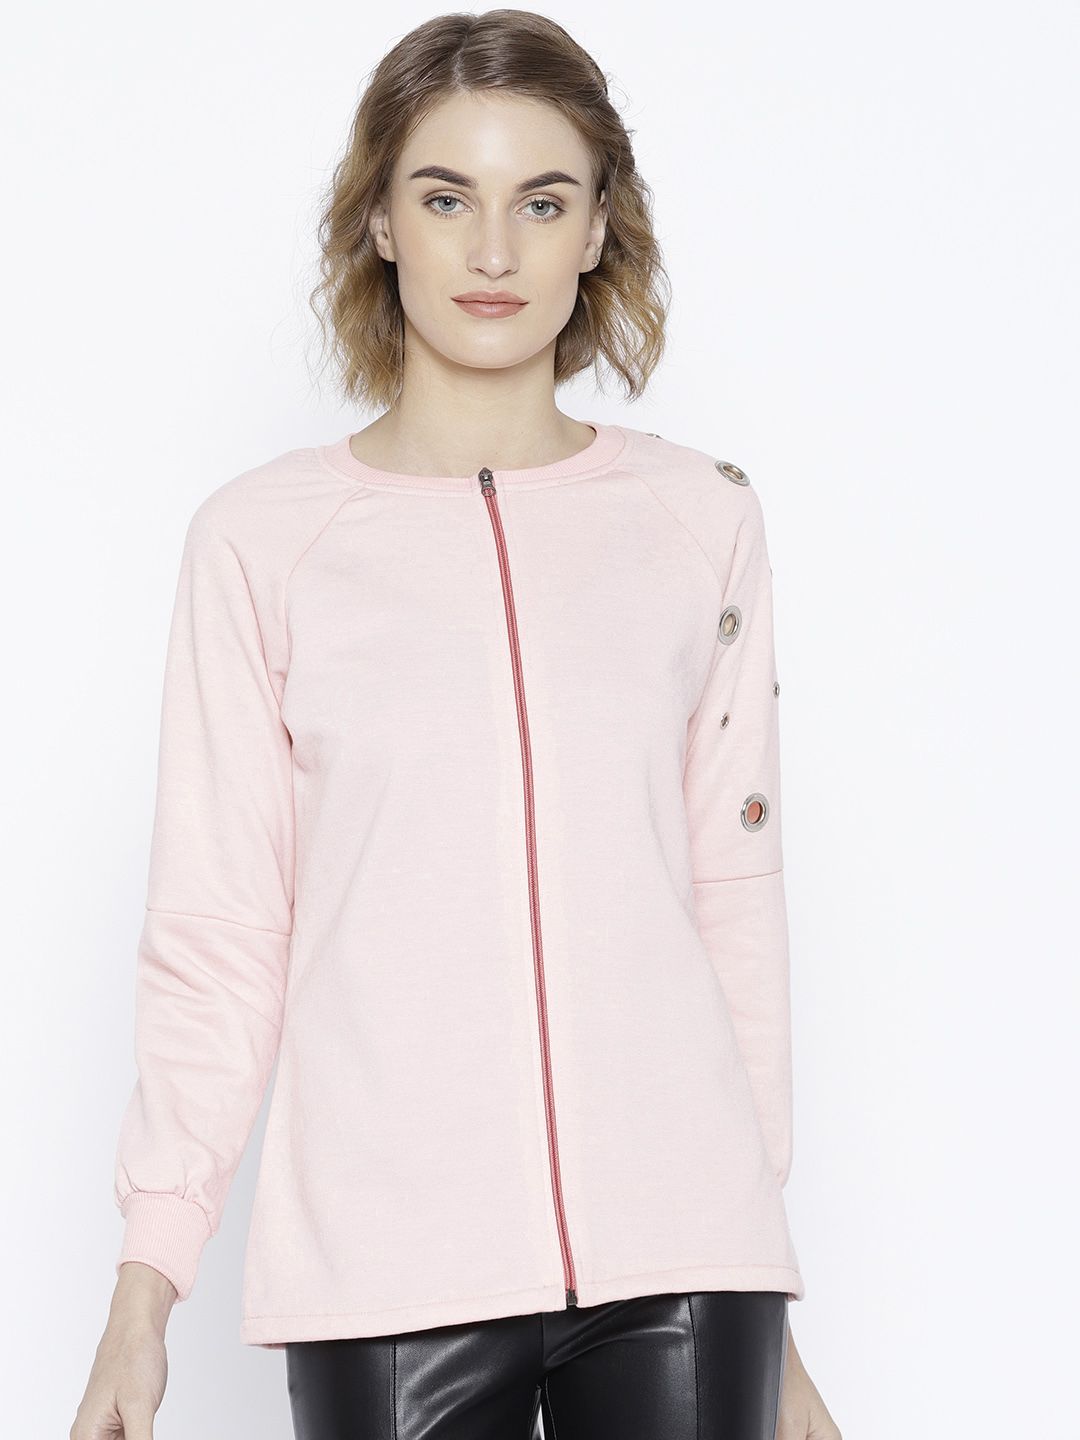 Belle Fille Women Pink Solid Sweatshirt with Cut-Out Detail Price in India